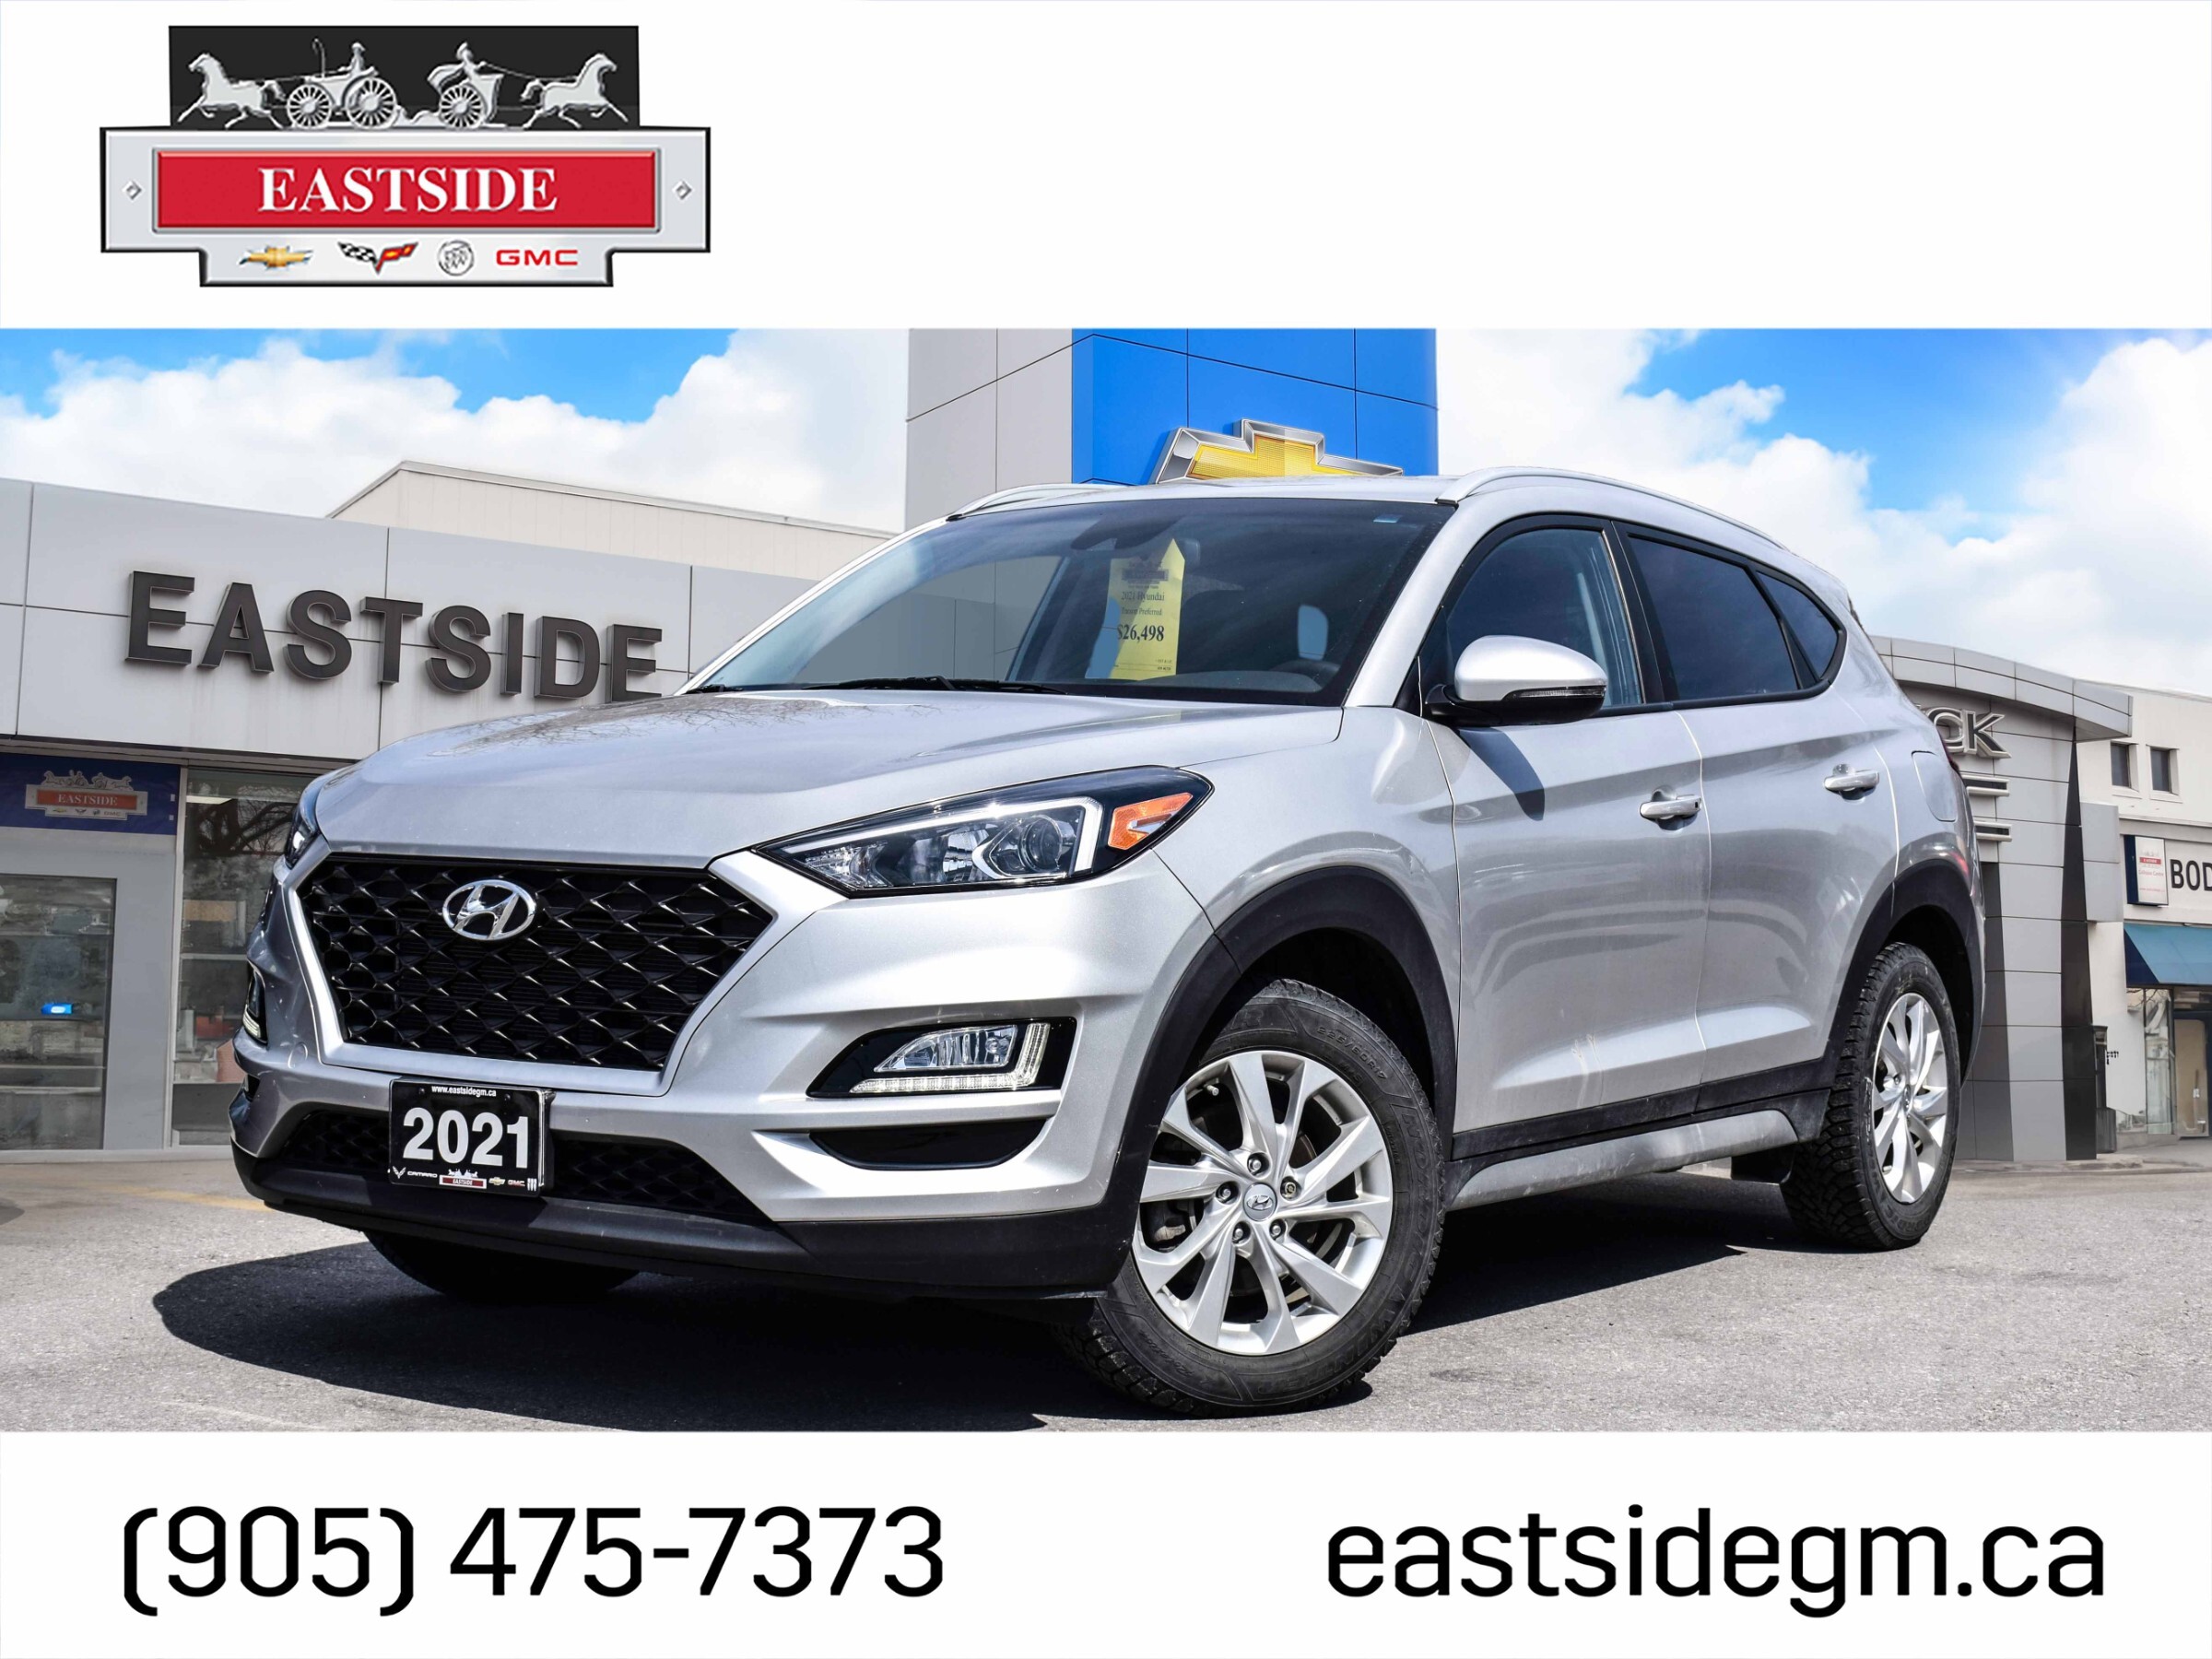 2021 Hyundai Tucson winter tires|clean carfax|AWD| Well maintained